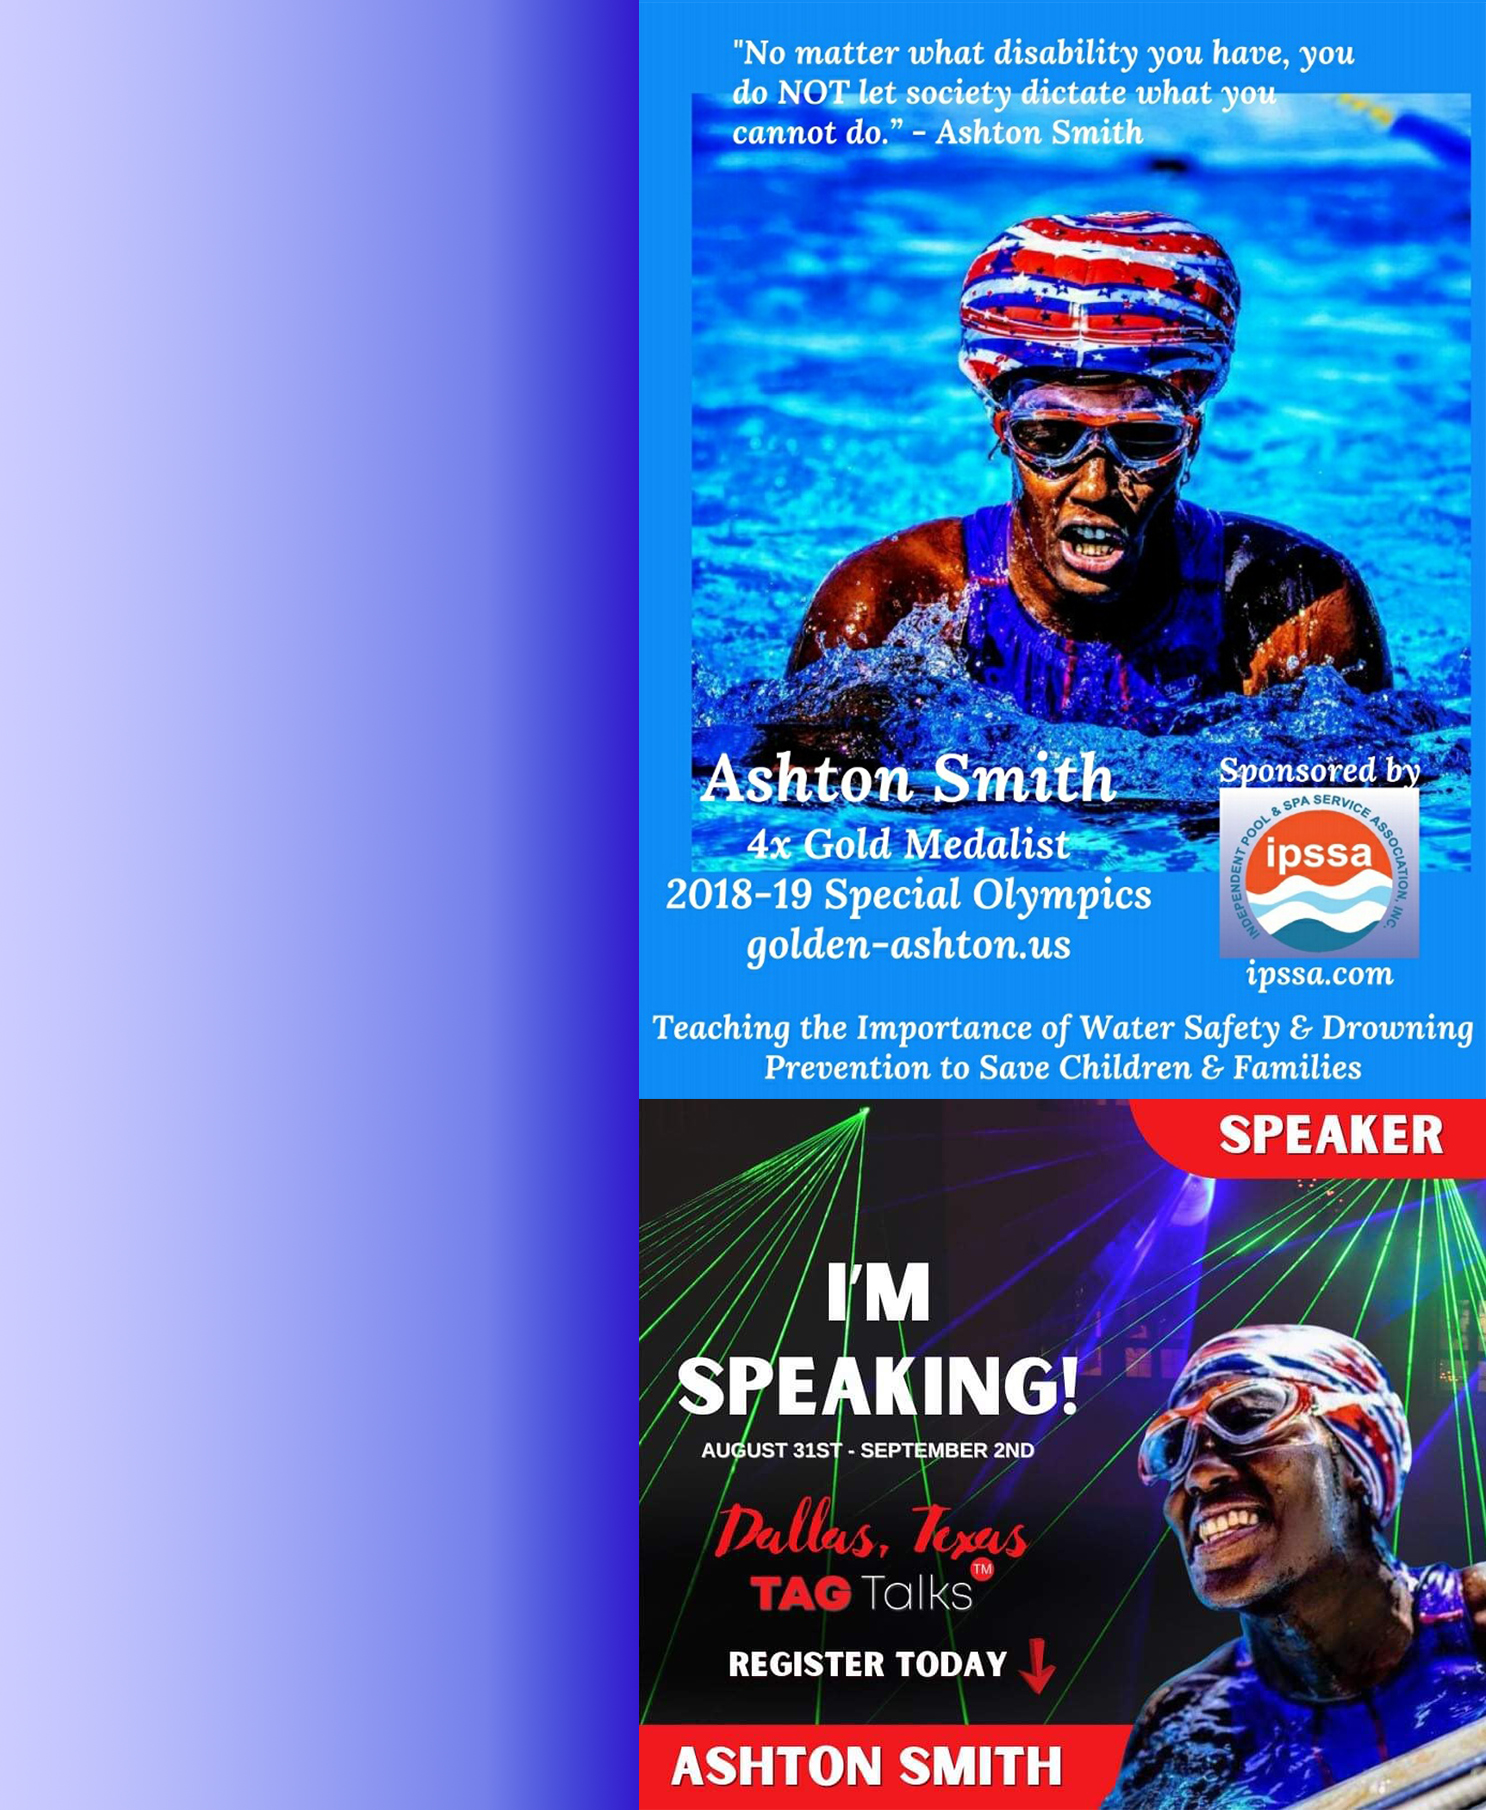 Two posters from Ashton Smith's sponsors, Independent Pool & Spa Service Association, Inc. and TAG Talks. The TAG Talks poster says that Ashton will speak from August 31 to September 2 in Dallas, Texas.